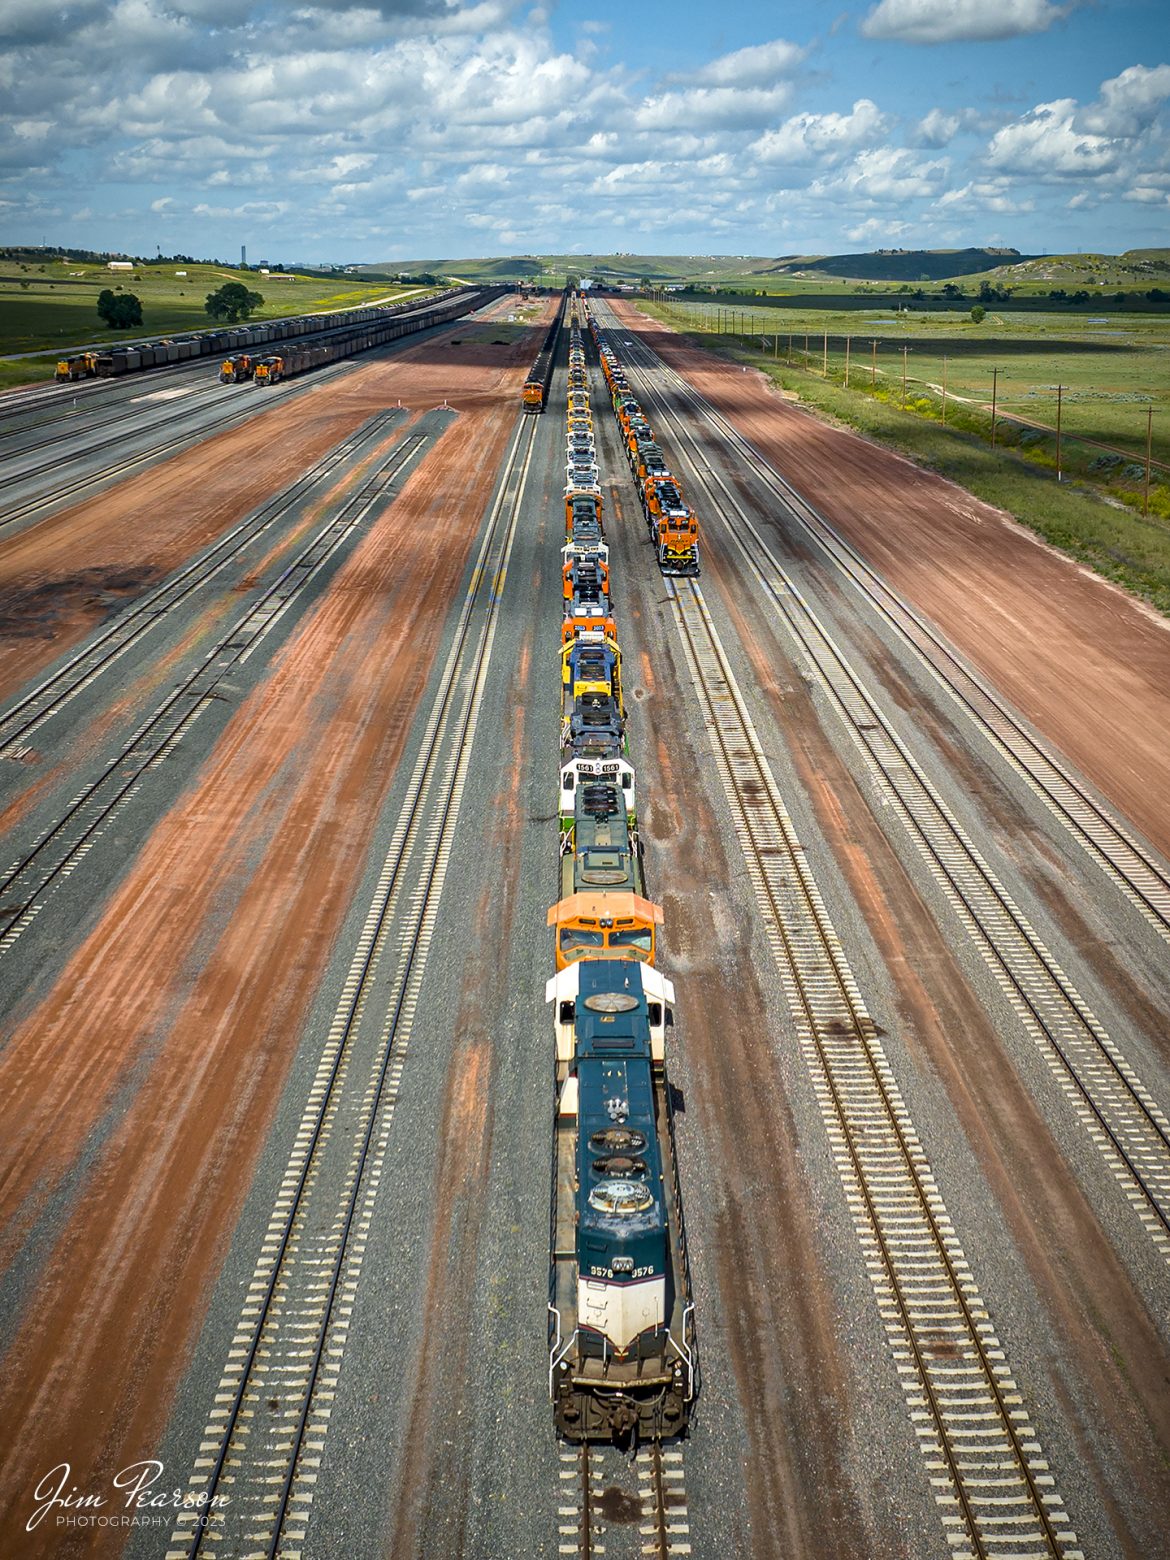 On June 28th, 2023, I tried to count the locomotives stored on the Black Hills Subdivision at the BNSF Donkey Creek Yard at Rozet, Wyoming in the two lines of locomotives from this picture, but theres too many and seem to go on forever. The trains on the far left are coal trains, loaded and empty, waiting on crews.

According to news reports I found online, this yard was scheduled to close June 5th, 2022, affecting 38 jobs, but from what I could see there were people working in the yard, so Im not sure if that happened or not. The reported layoff was due to the tough market for coal. It has been a bit over a year and perhaps things have changed since then.

Tech Info: DJI Mavic 3 Classic Drone, RAW, 24mm, f/2.8, 1/1600, ISO 100.

#trainphotography #railroadphotography #trains #railways #dronephotography #trainphotographer #railroadphotographer #jimpearsonphotography #trains #mavic3classic #drones #trainsfromtheair #trainsfromadrone #BNSF